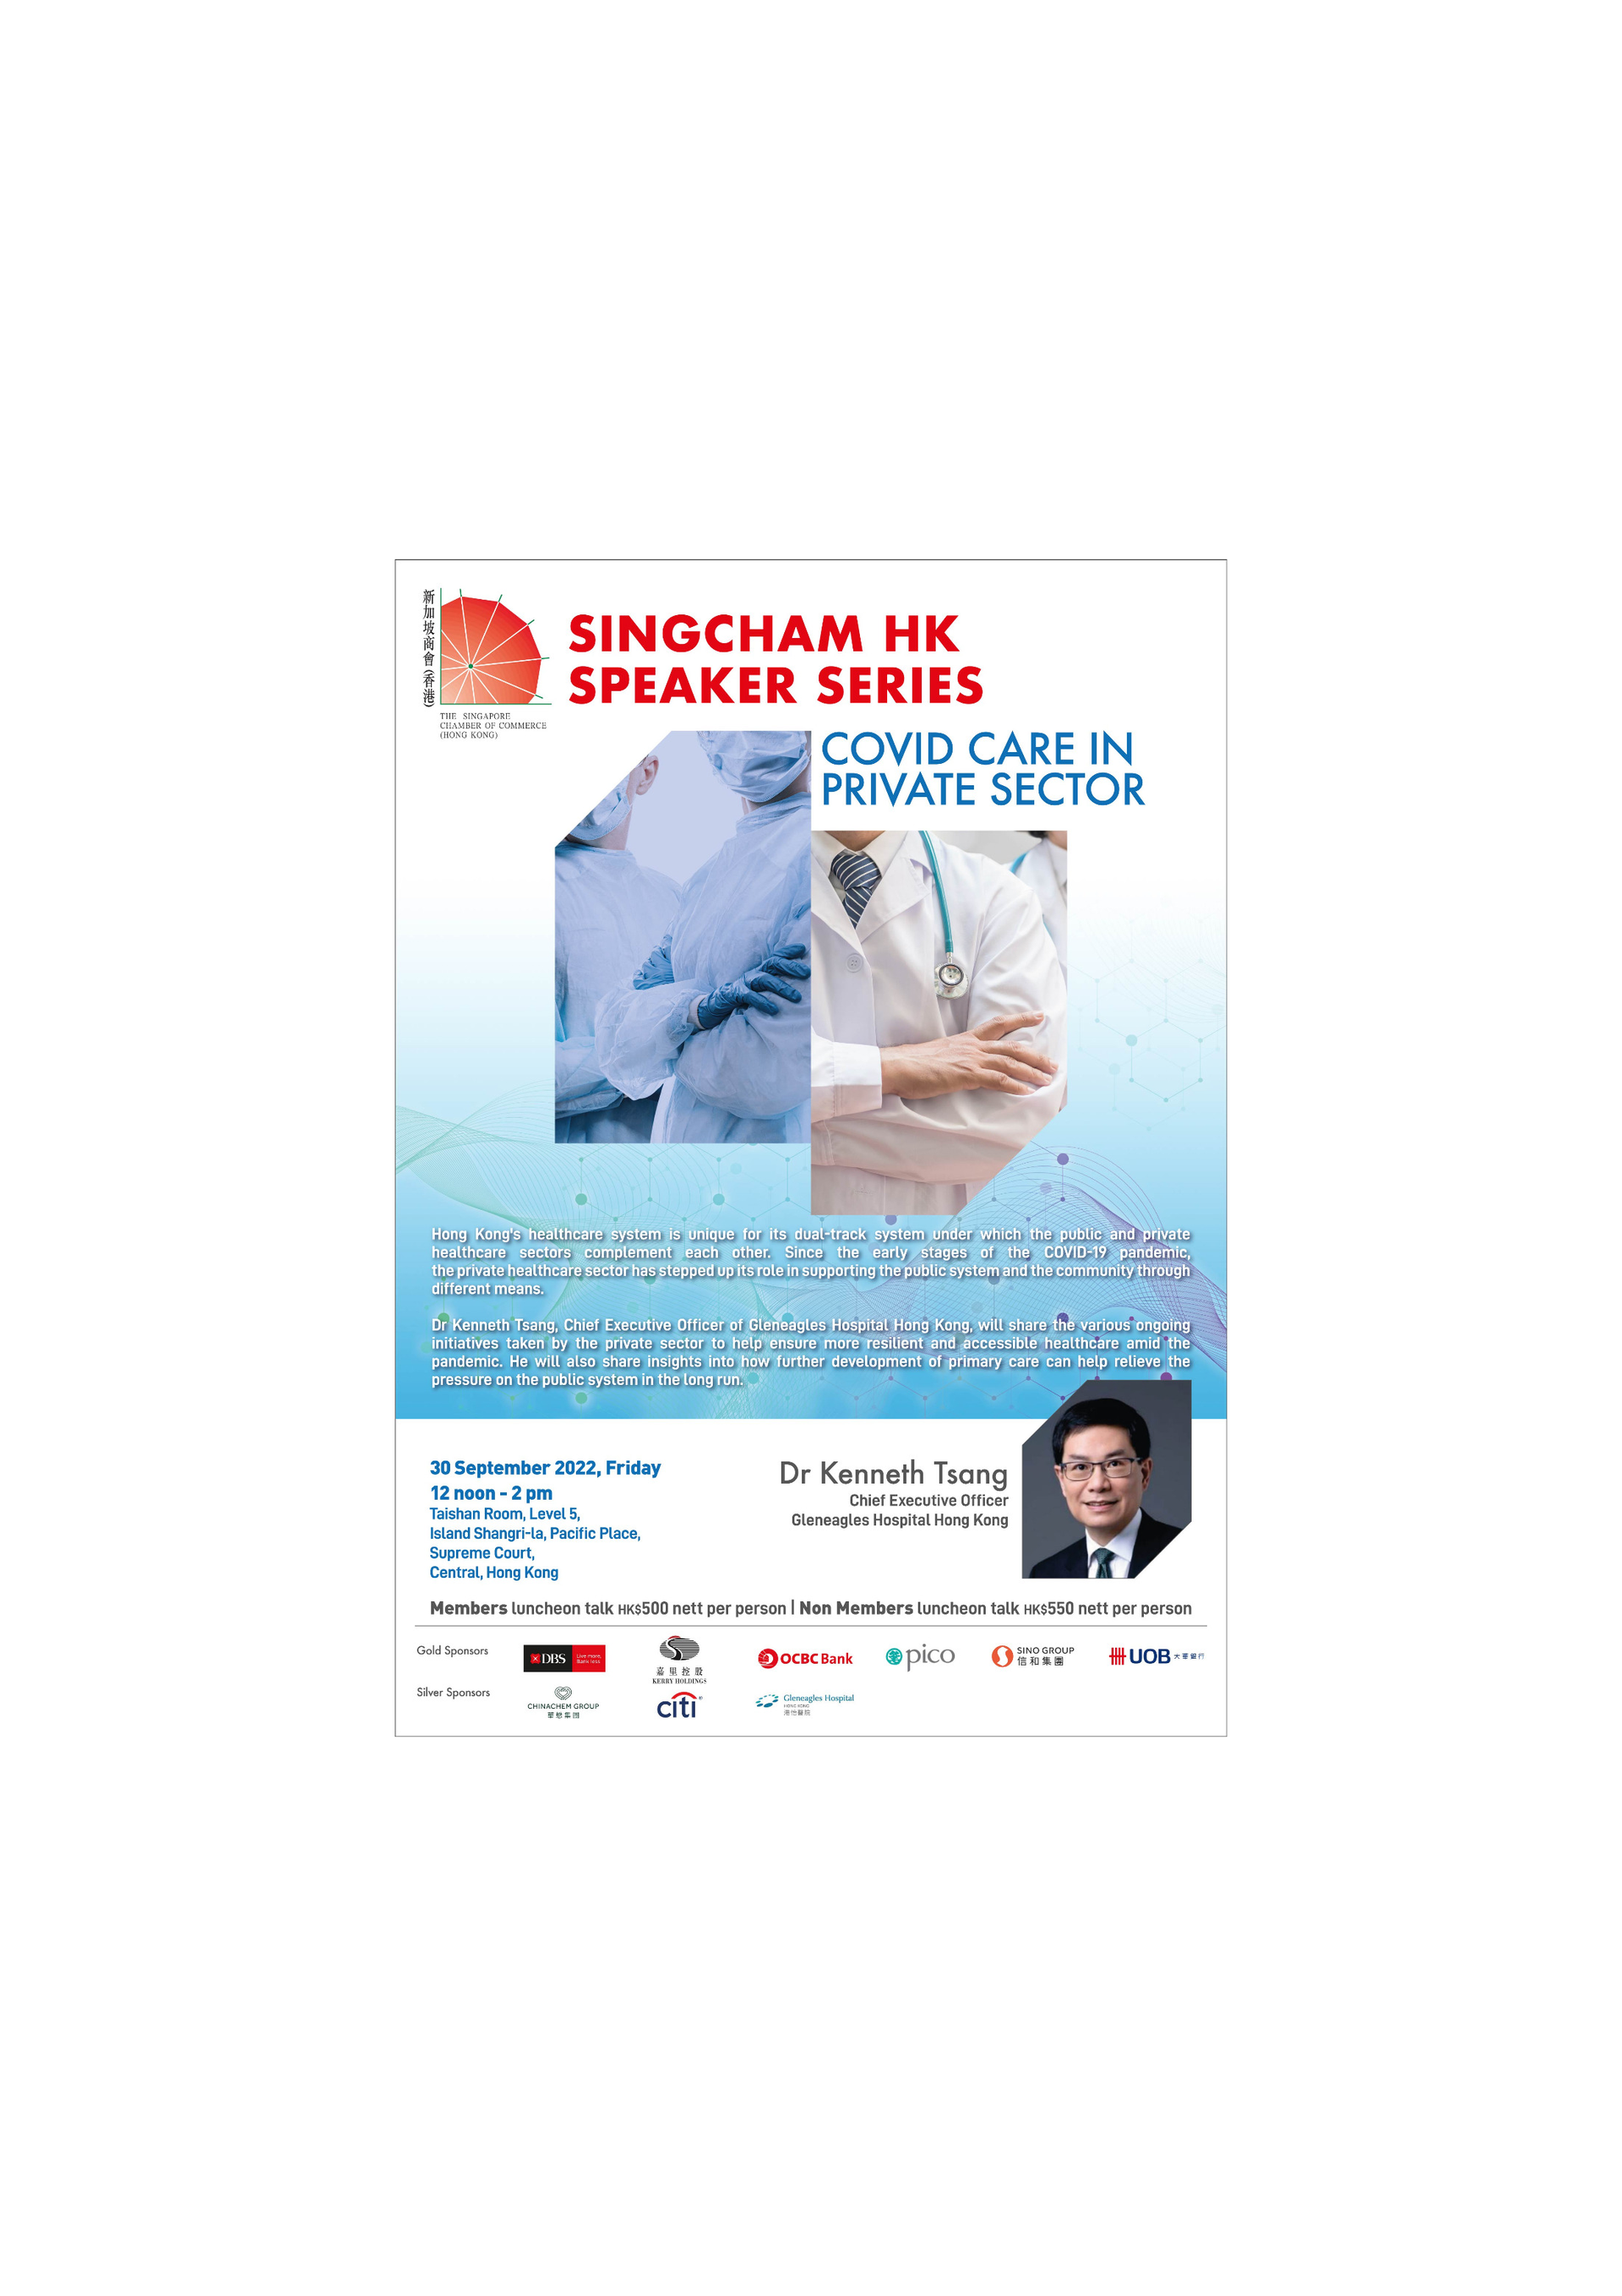 thumbnails [SingCham HK Speaker Series] Luncheon Talk on "COVID Care in Private Sector" by Dr Kenneth Tsang of Gleneagles Hospital Hong Kong